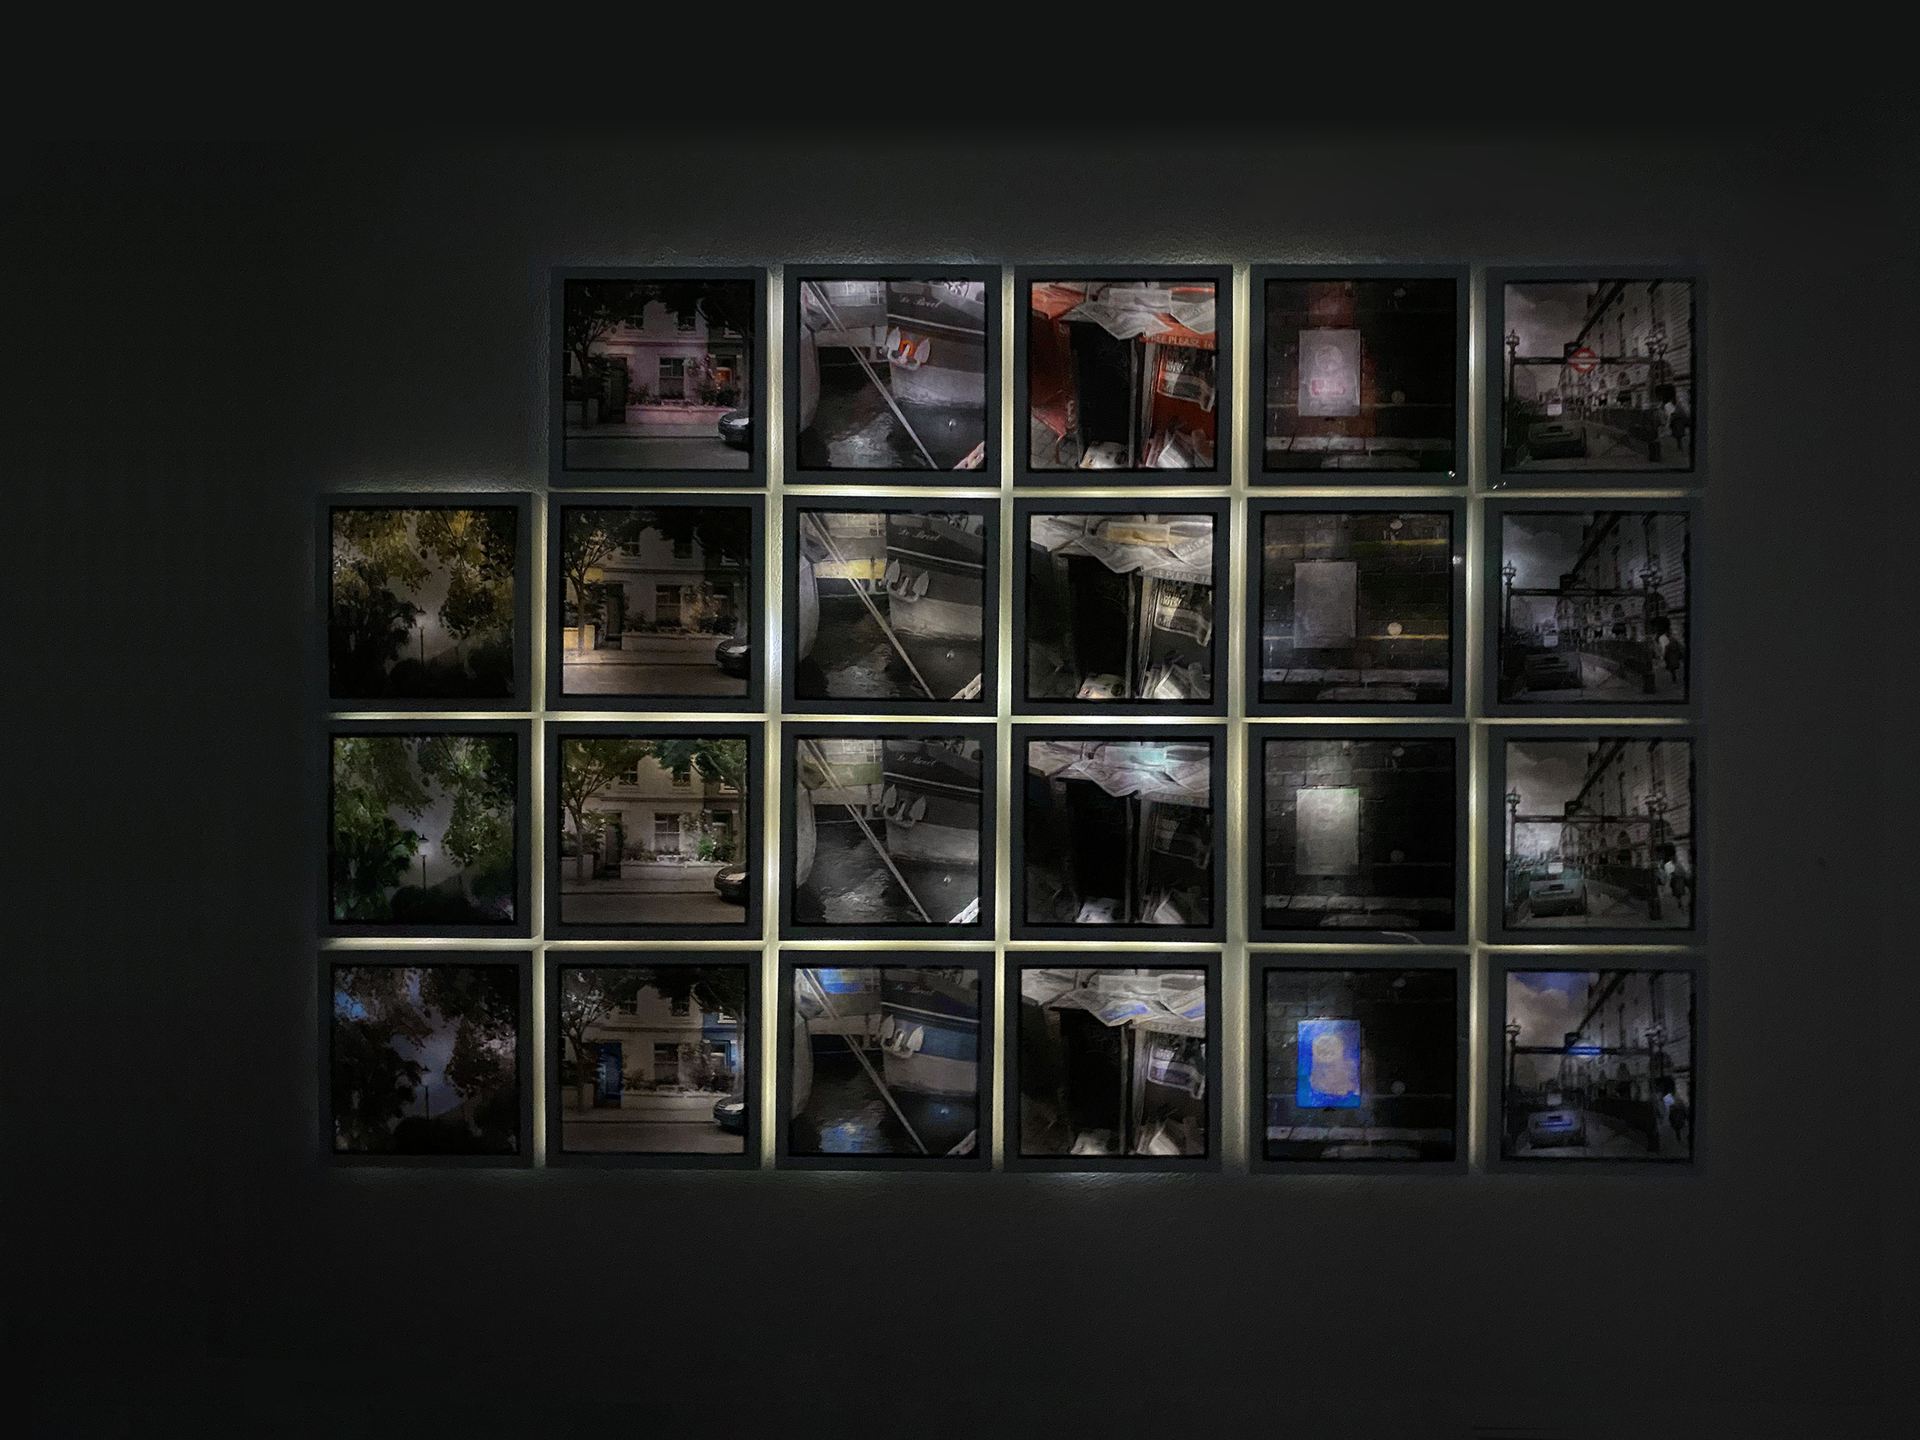 An image of a grid of abstract images in white, square frames against a black background.